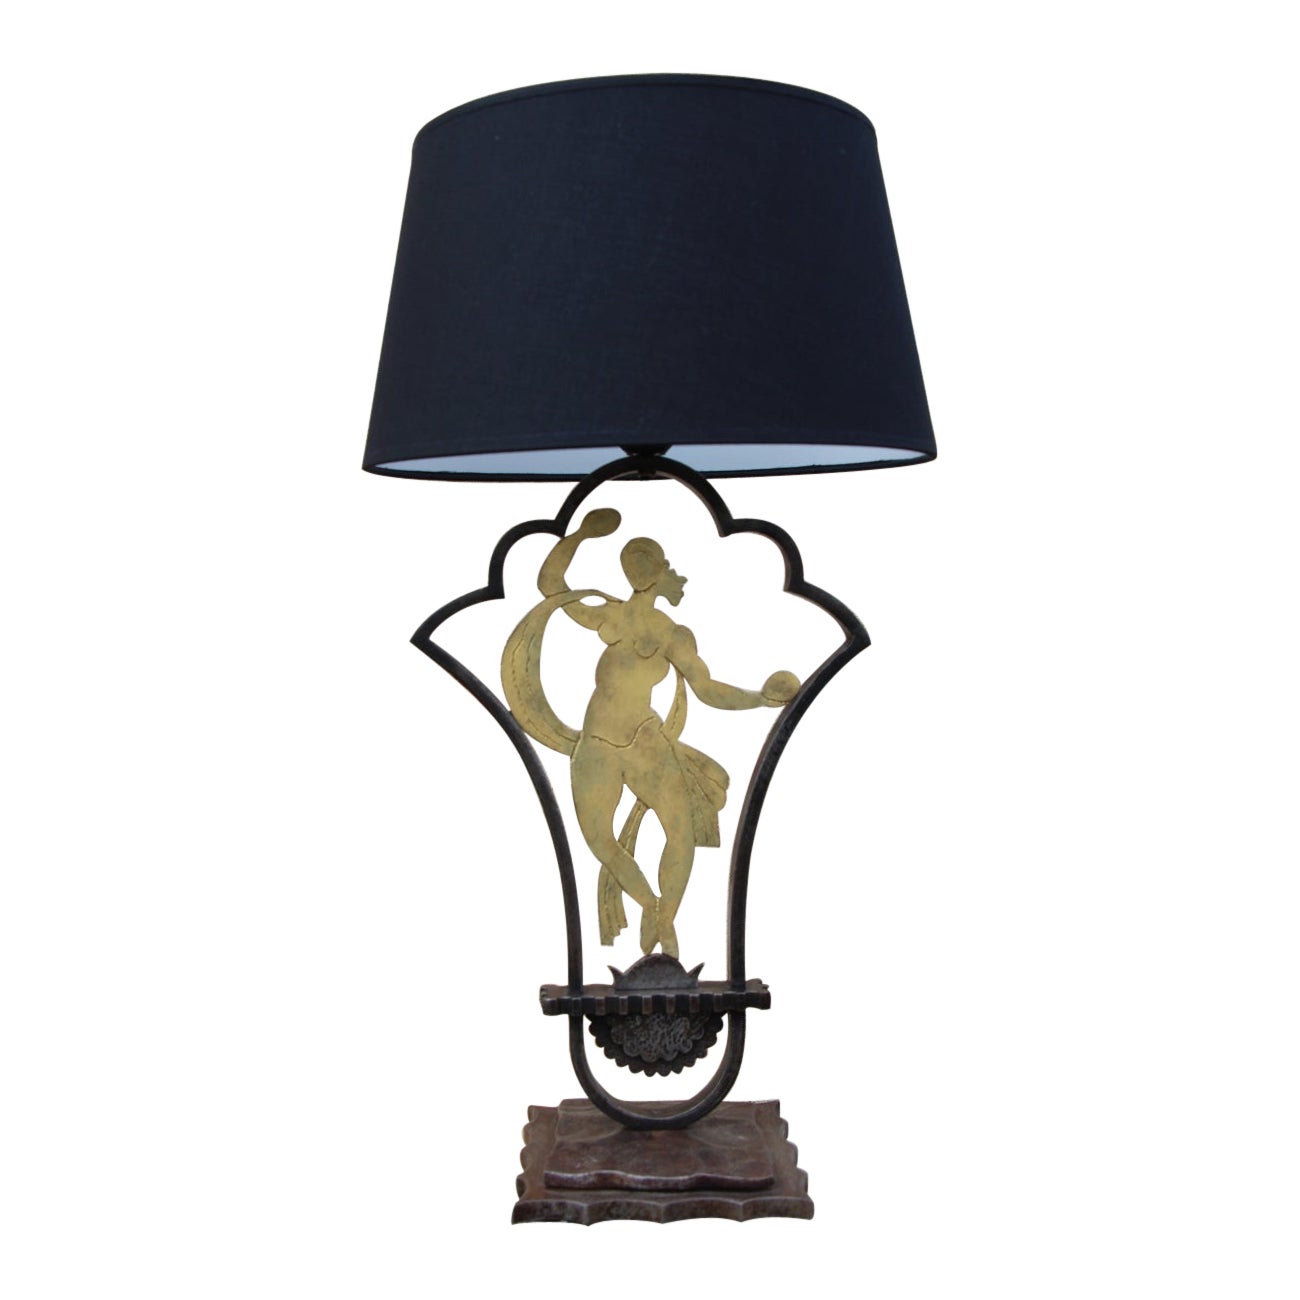 Lamp By Edgar Brandt In Art Deco Wrought Iron For Sale